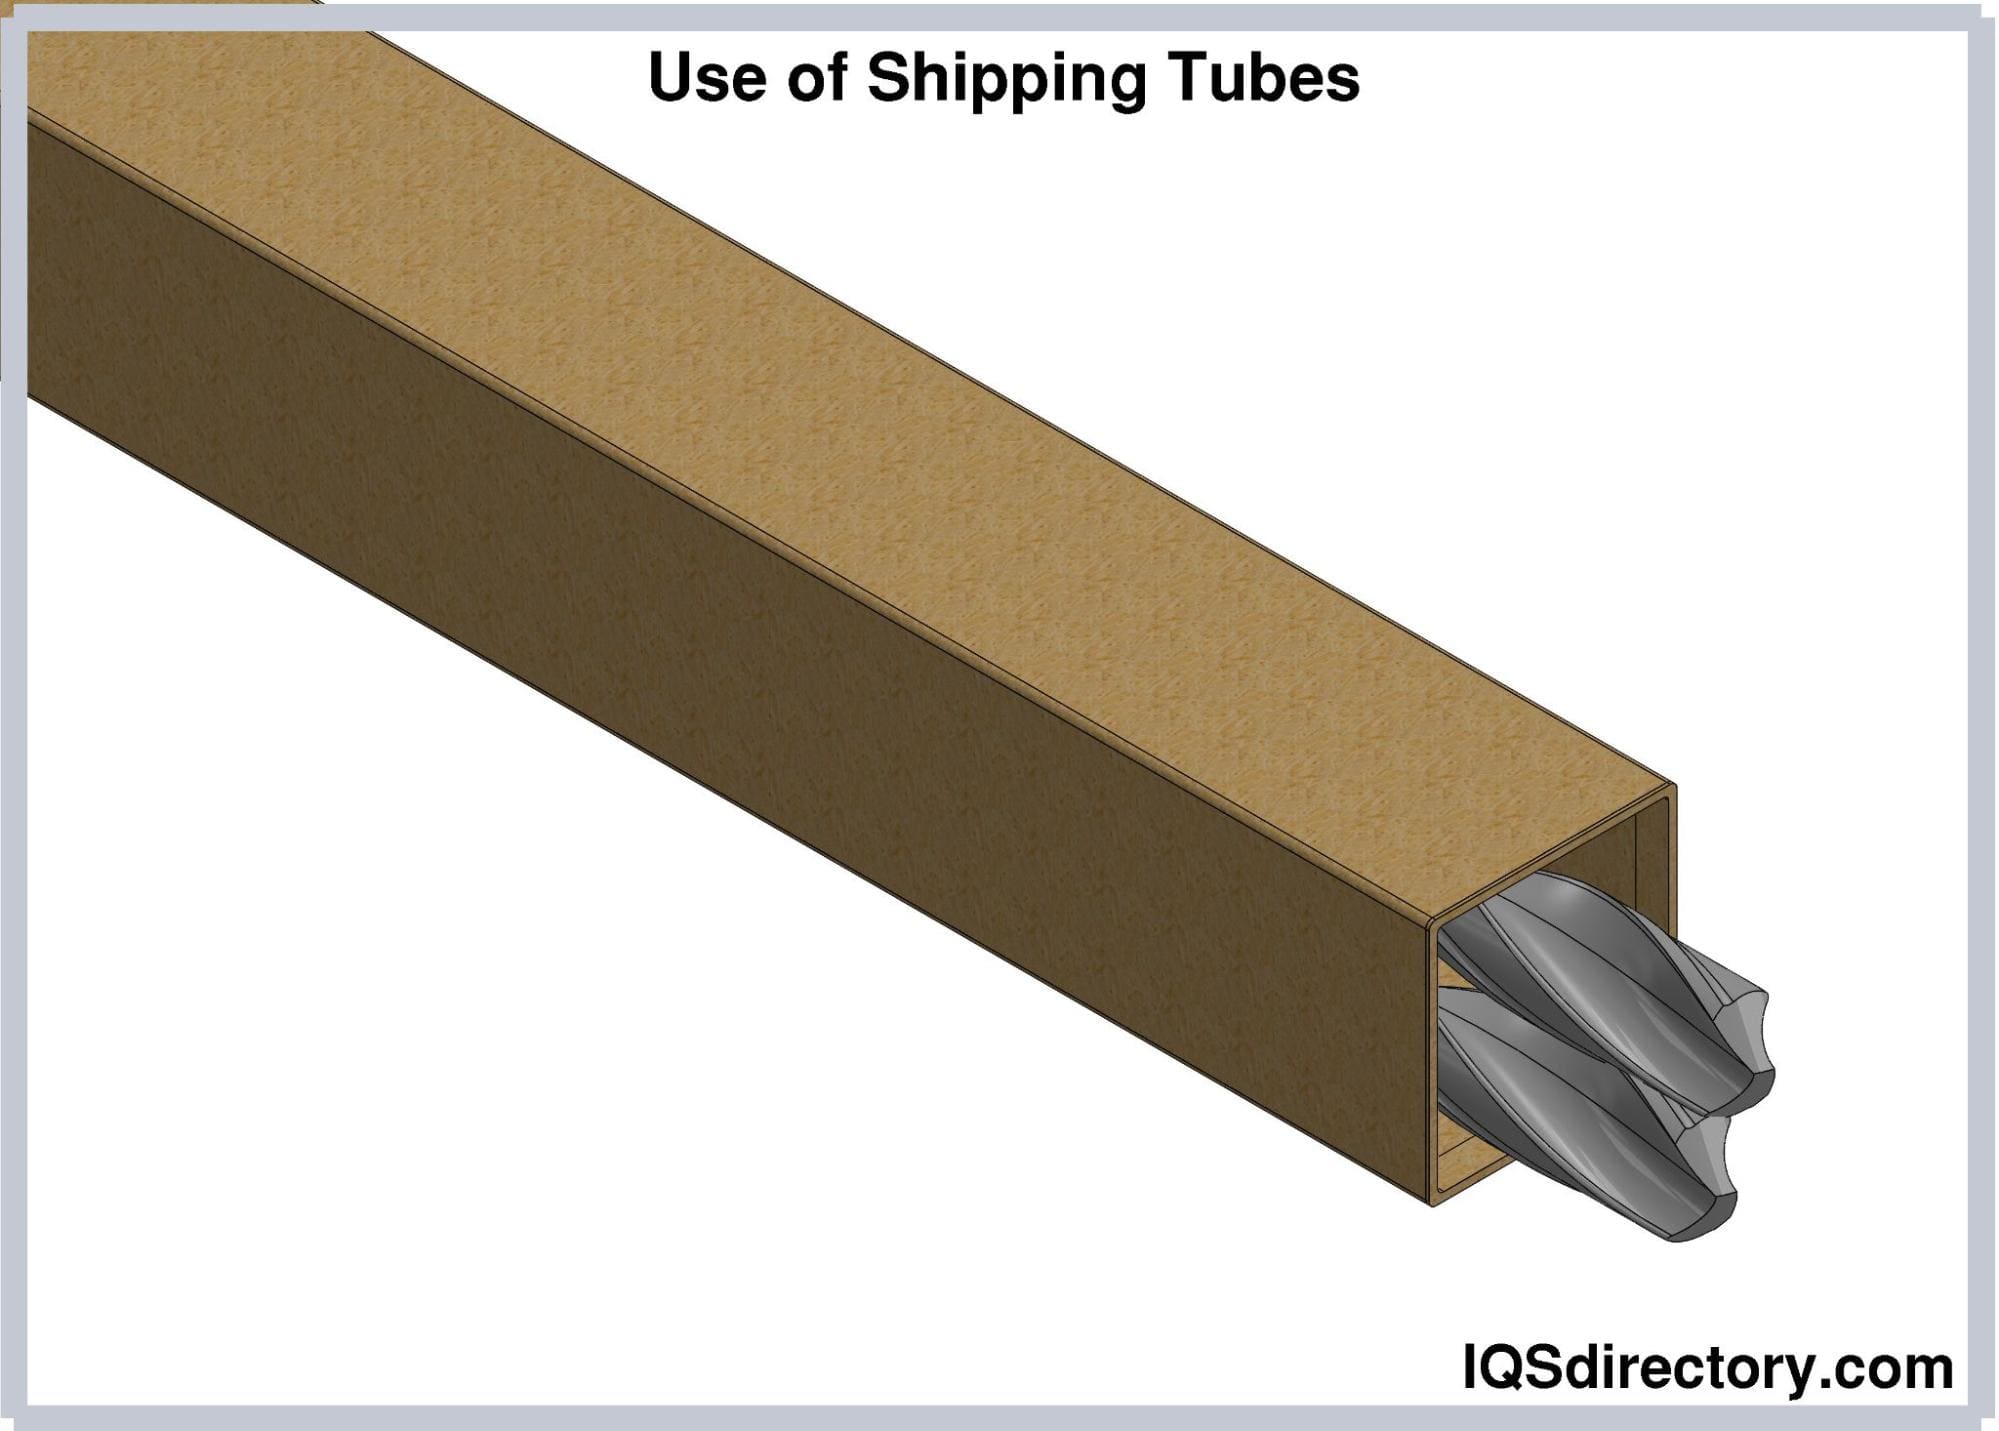 Use of Shipping Tubes